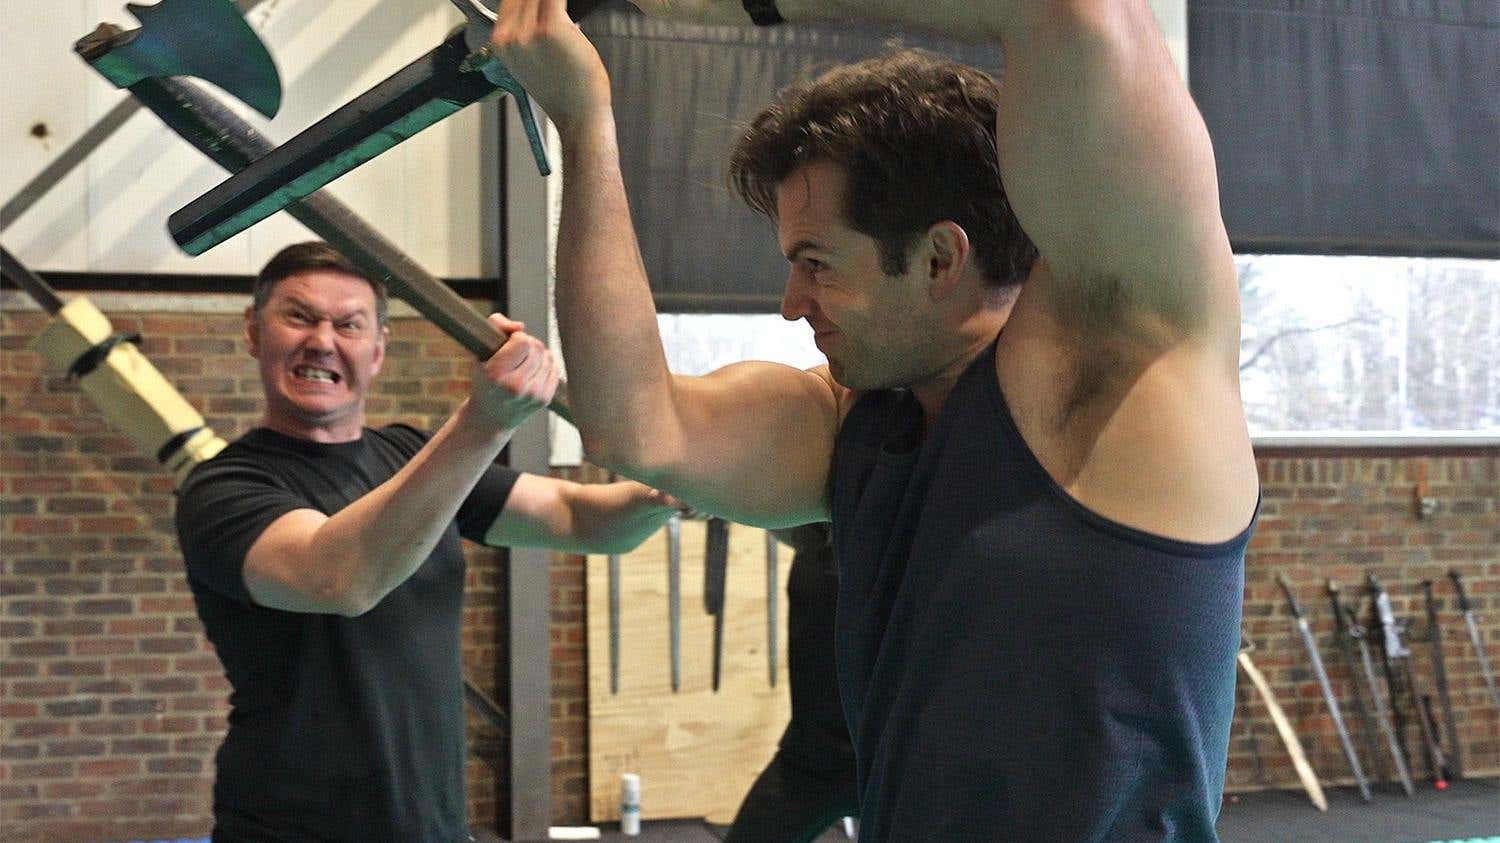 Henry Cavill entrenando para The Witcher